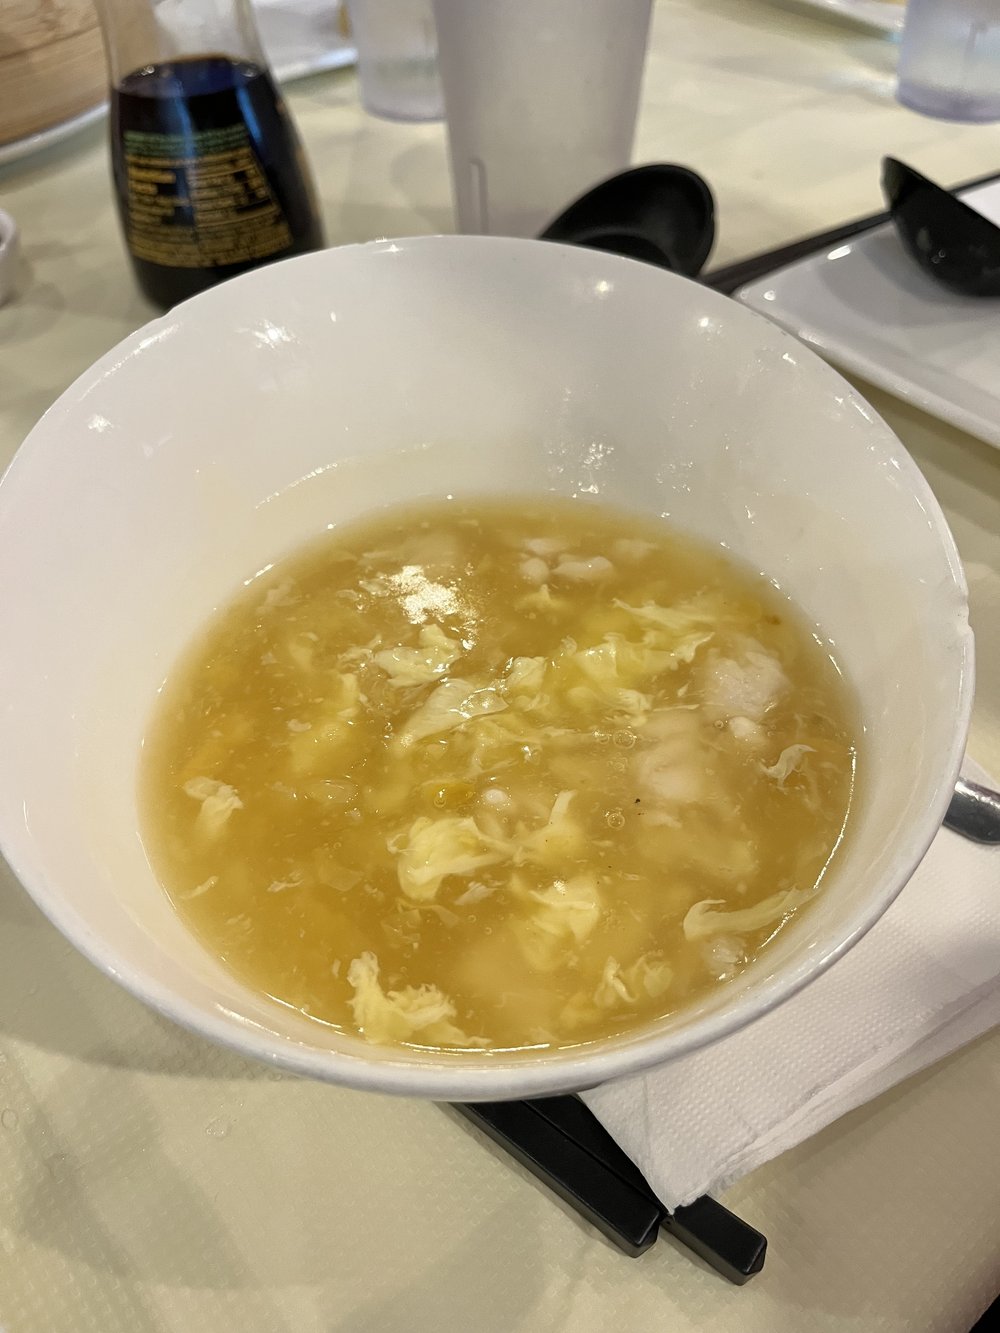 Hing Kee Restaurant Chicken and sweet corn soup Chinatown Square Chicago.jpg